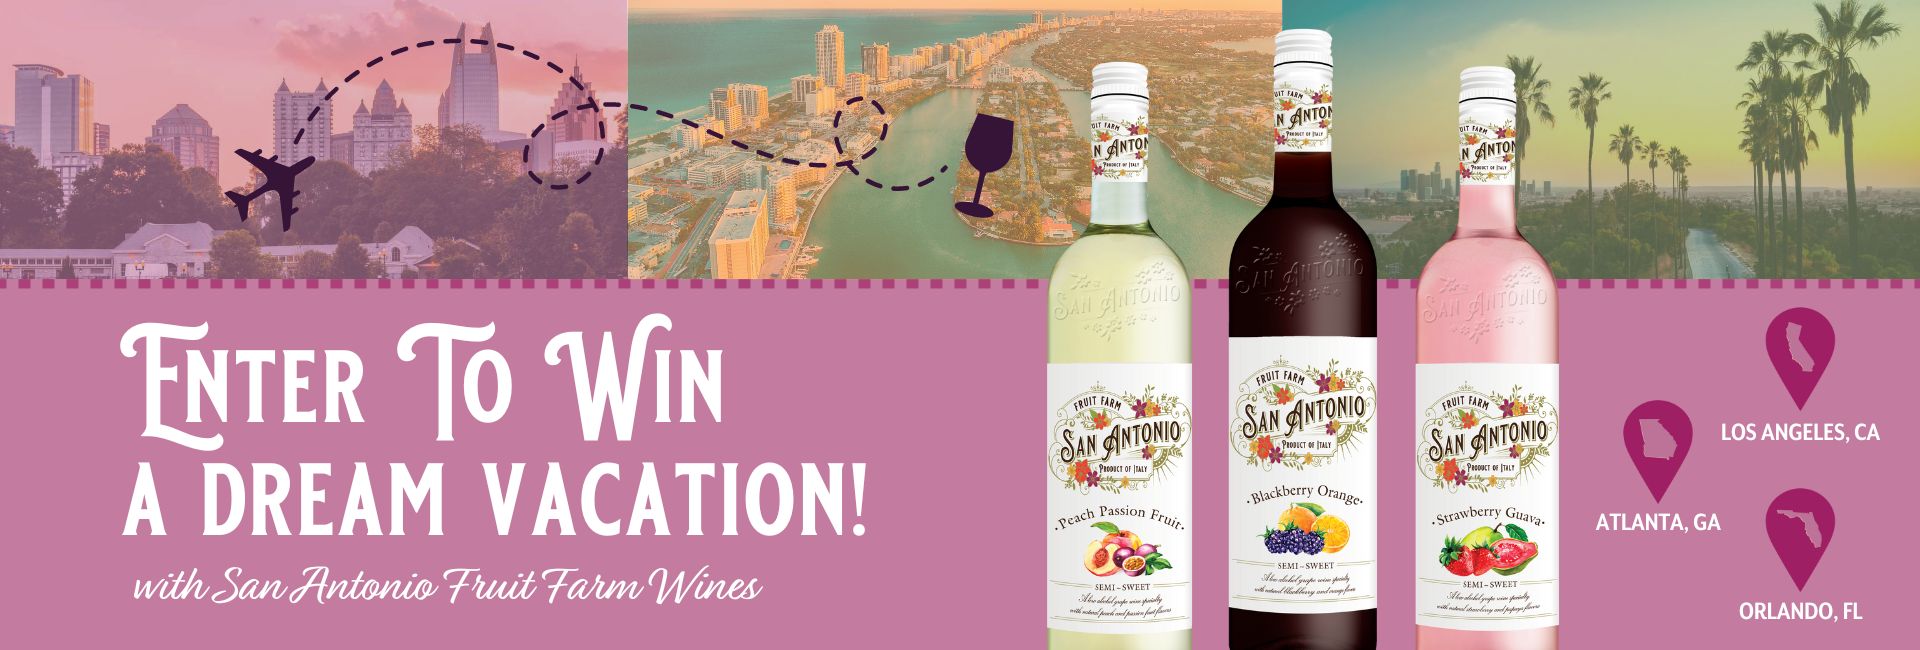 Enter to win a dream vacation with San Antonio Fruit Farm